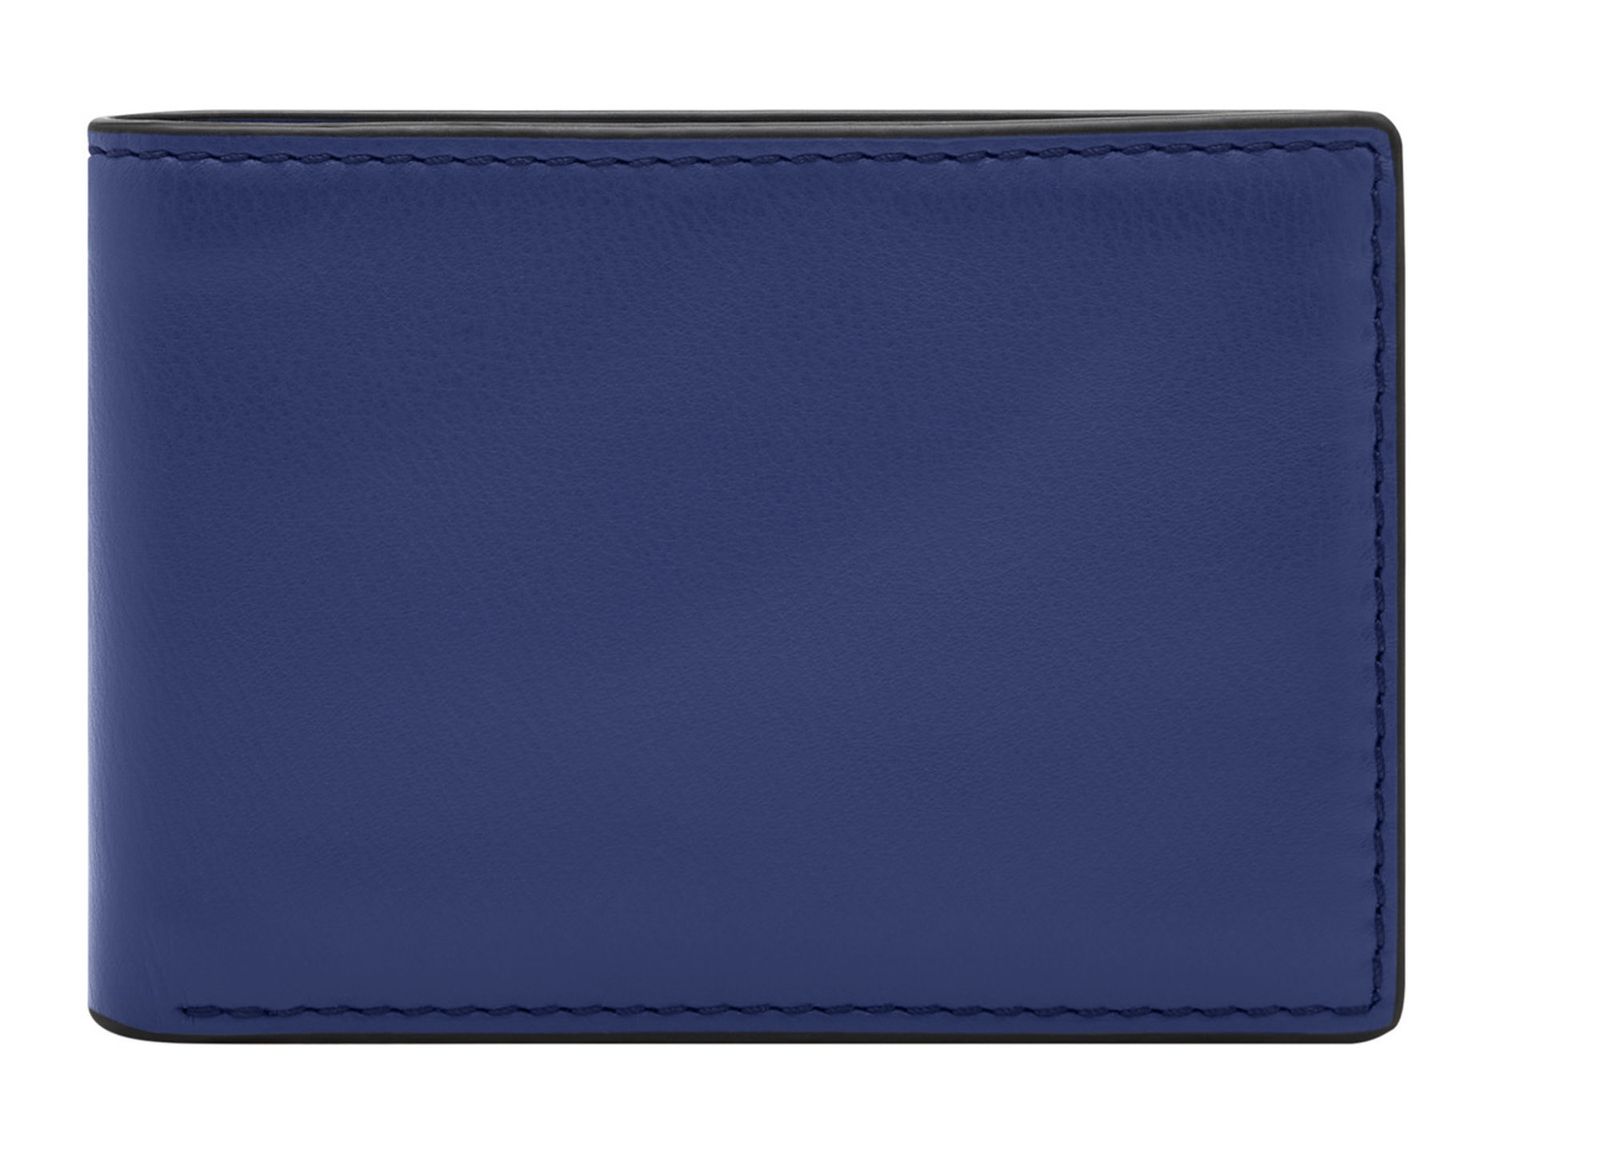 FOSSIL Steven FPW Bifold Wallet Pacific Blue | Buy bags, purses ...